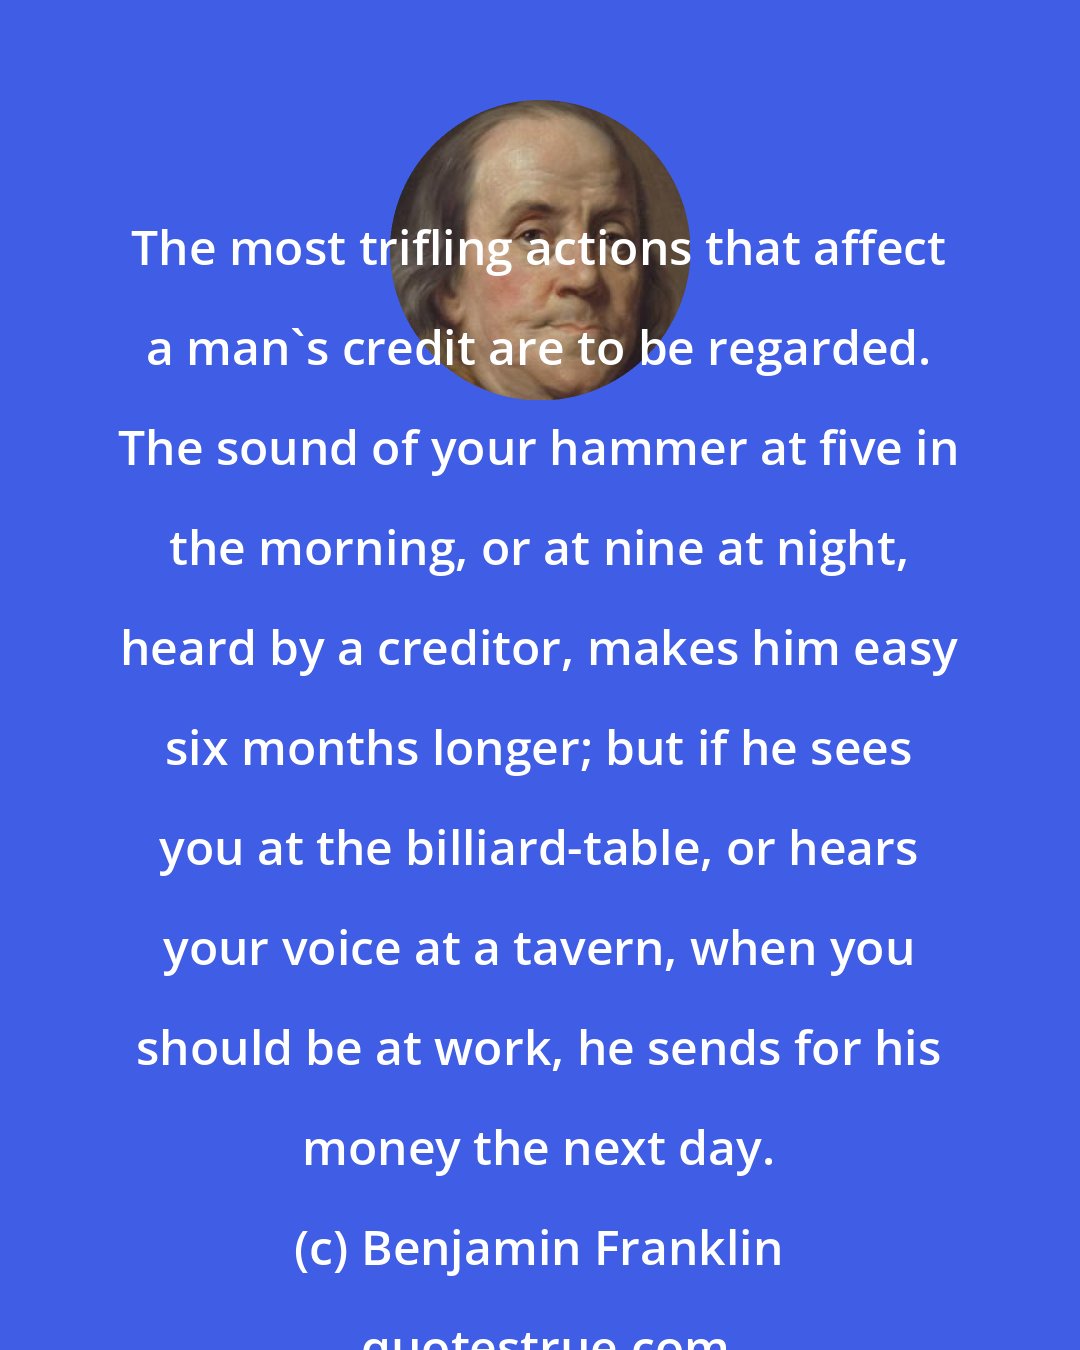 Benjamin Franklin: The most trifling actions that affect a man's credit are to be regarded. The sound of your hammer at five in the morning, or at nine at night, heard by a creditor, makes him easy six months longer; but if he sees you at the billiard-table, or hears your voice at a tavern, when you should be at work, he sends for his money the next day.